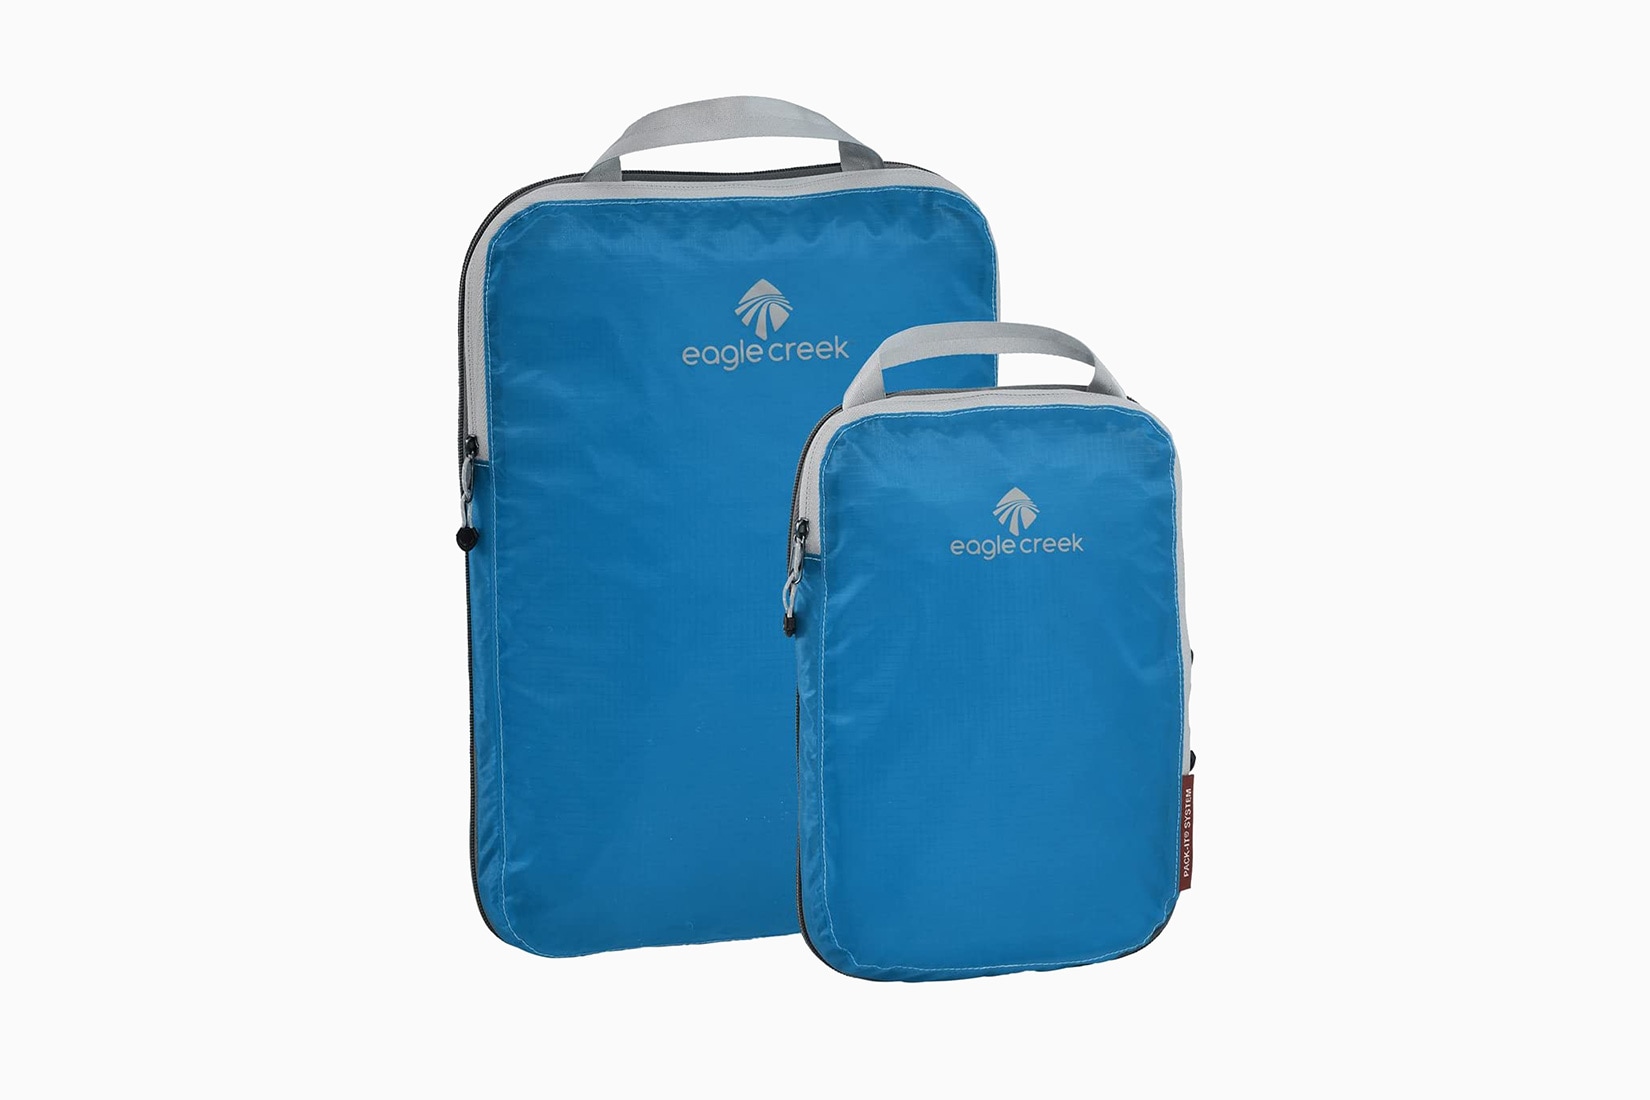 best packing cubes eagle creek compression - Luxe Digital